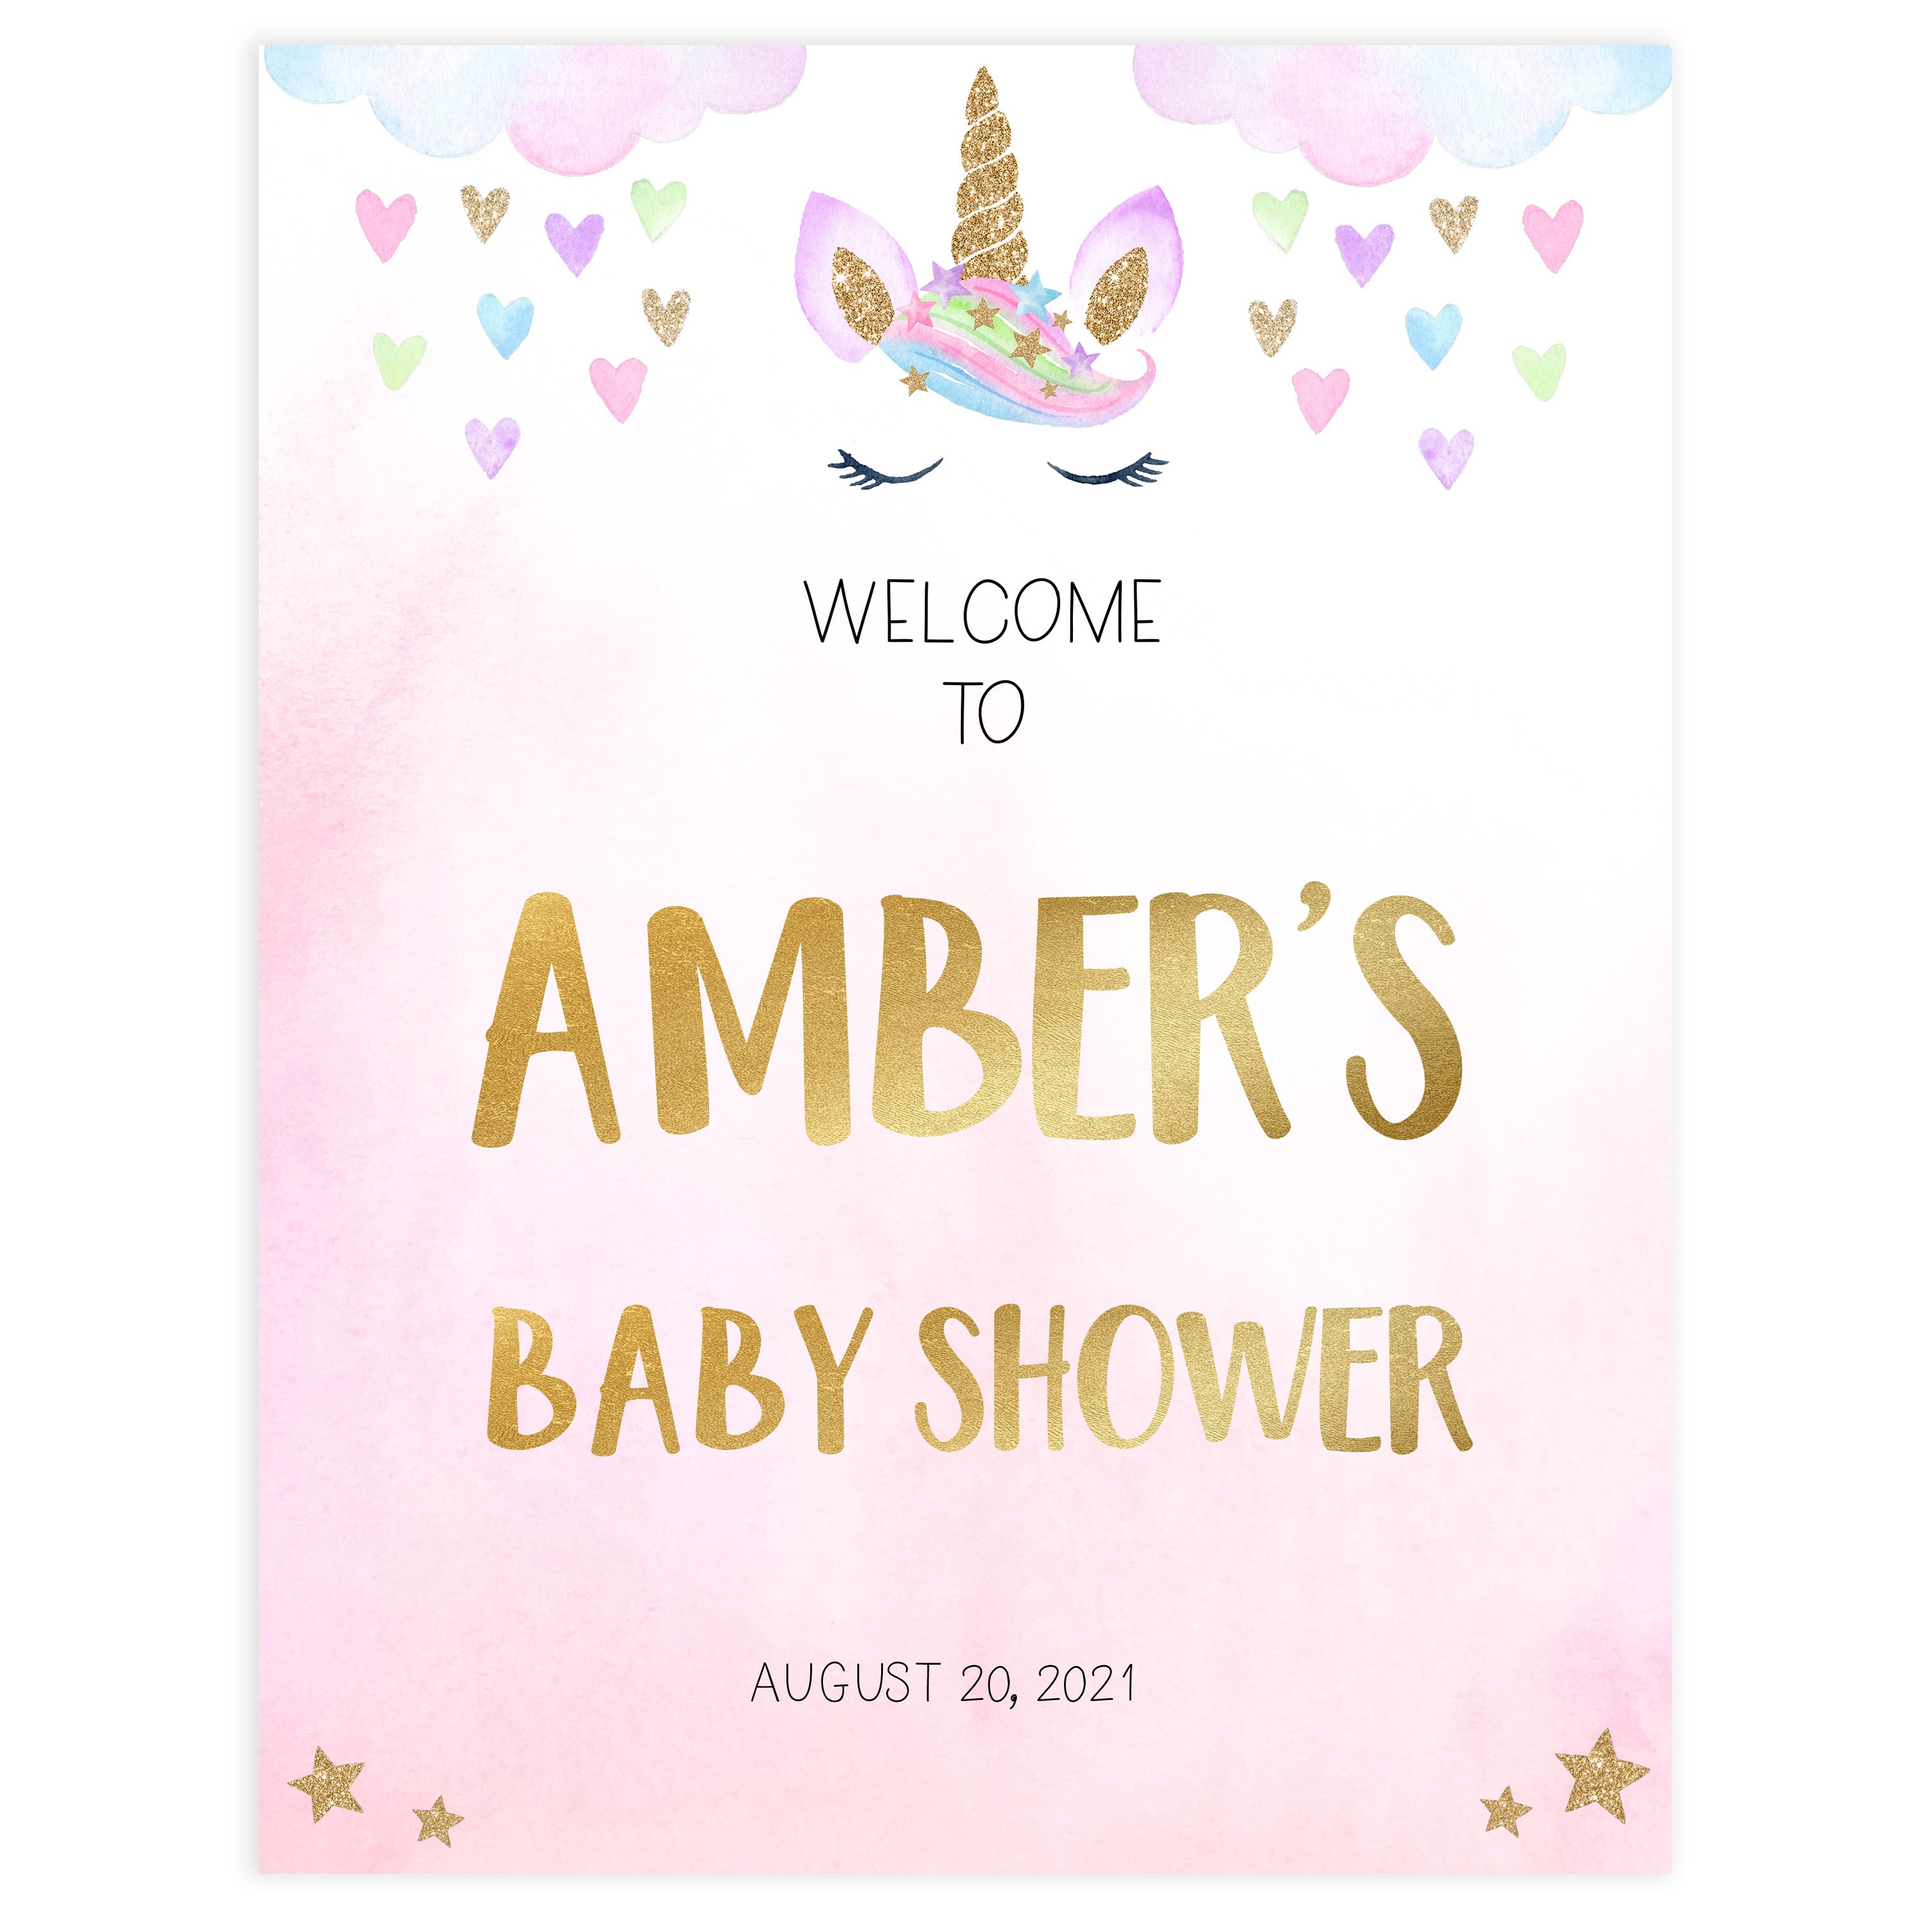 welcome baby shower sign, Printable baby shower games, unicorn baby games, baby shower games, fun baby shower ideas, top baby shower ideas, unicorn baby shower, baby shower games, fun unicorn baby shower ideas